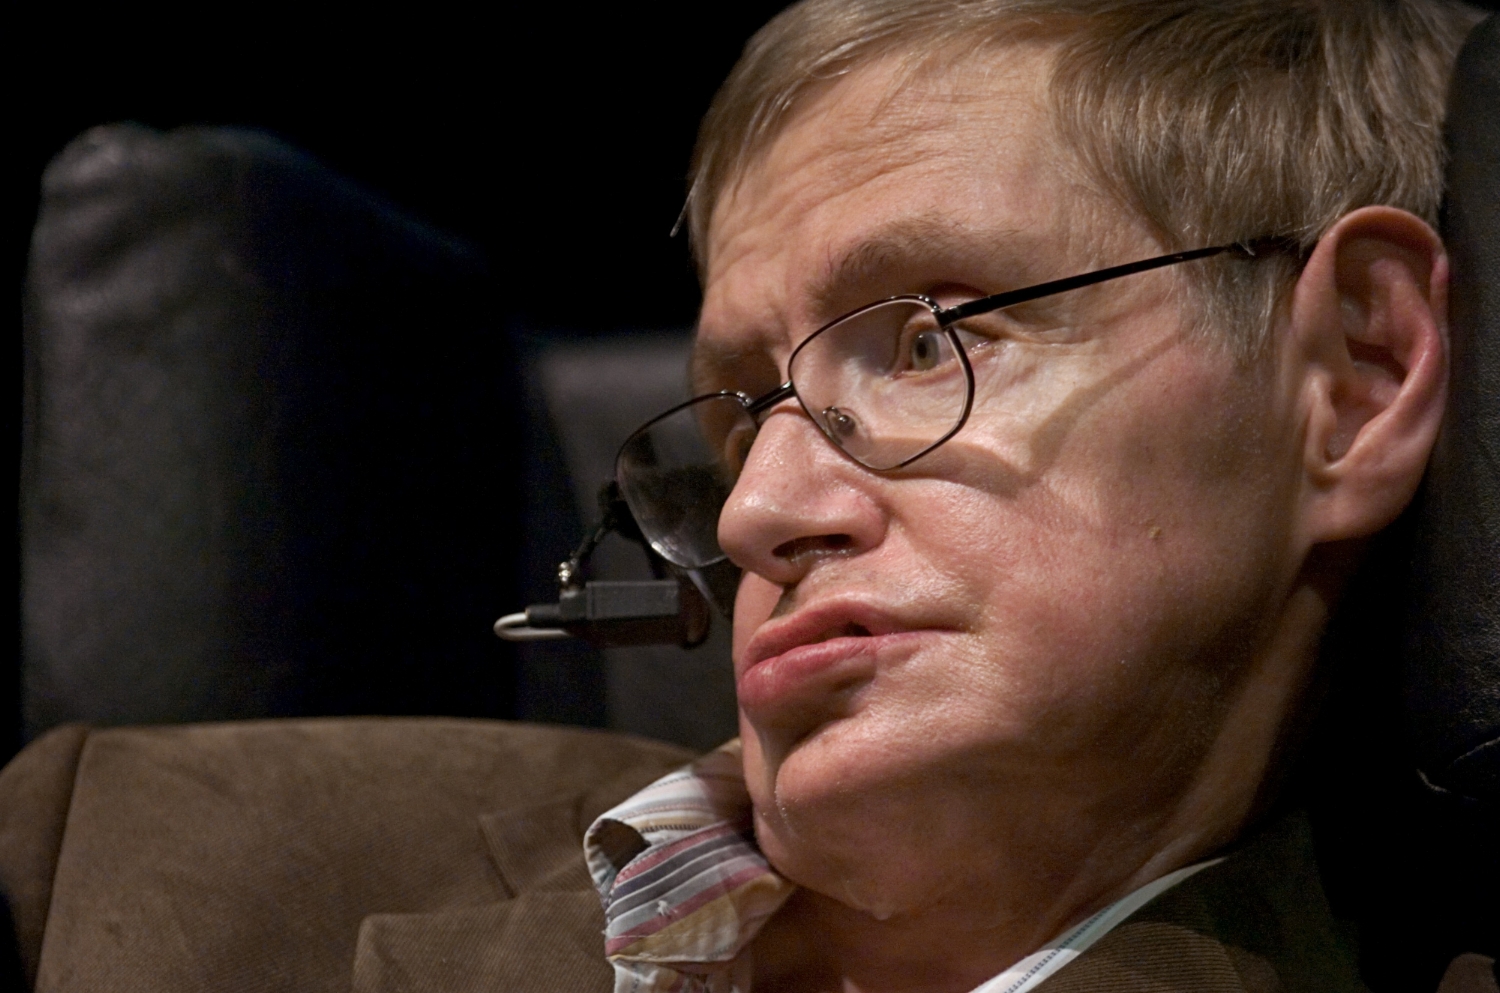  Cosmologist Stephen Hawking delivers the annual J. Robert Oppenheimer Lecture in Physics at Zellerbach Hall at UC Berkeley on Tuesday March 13, 2007. 